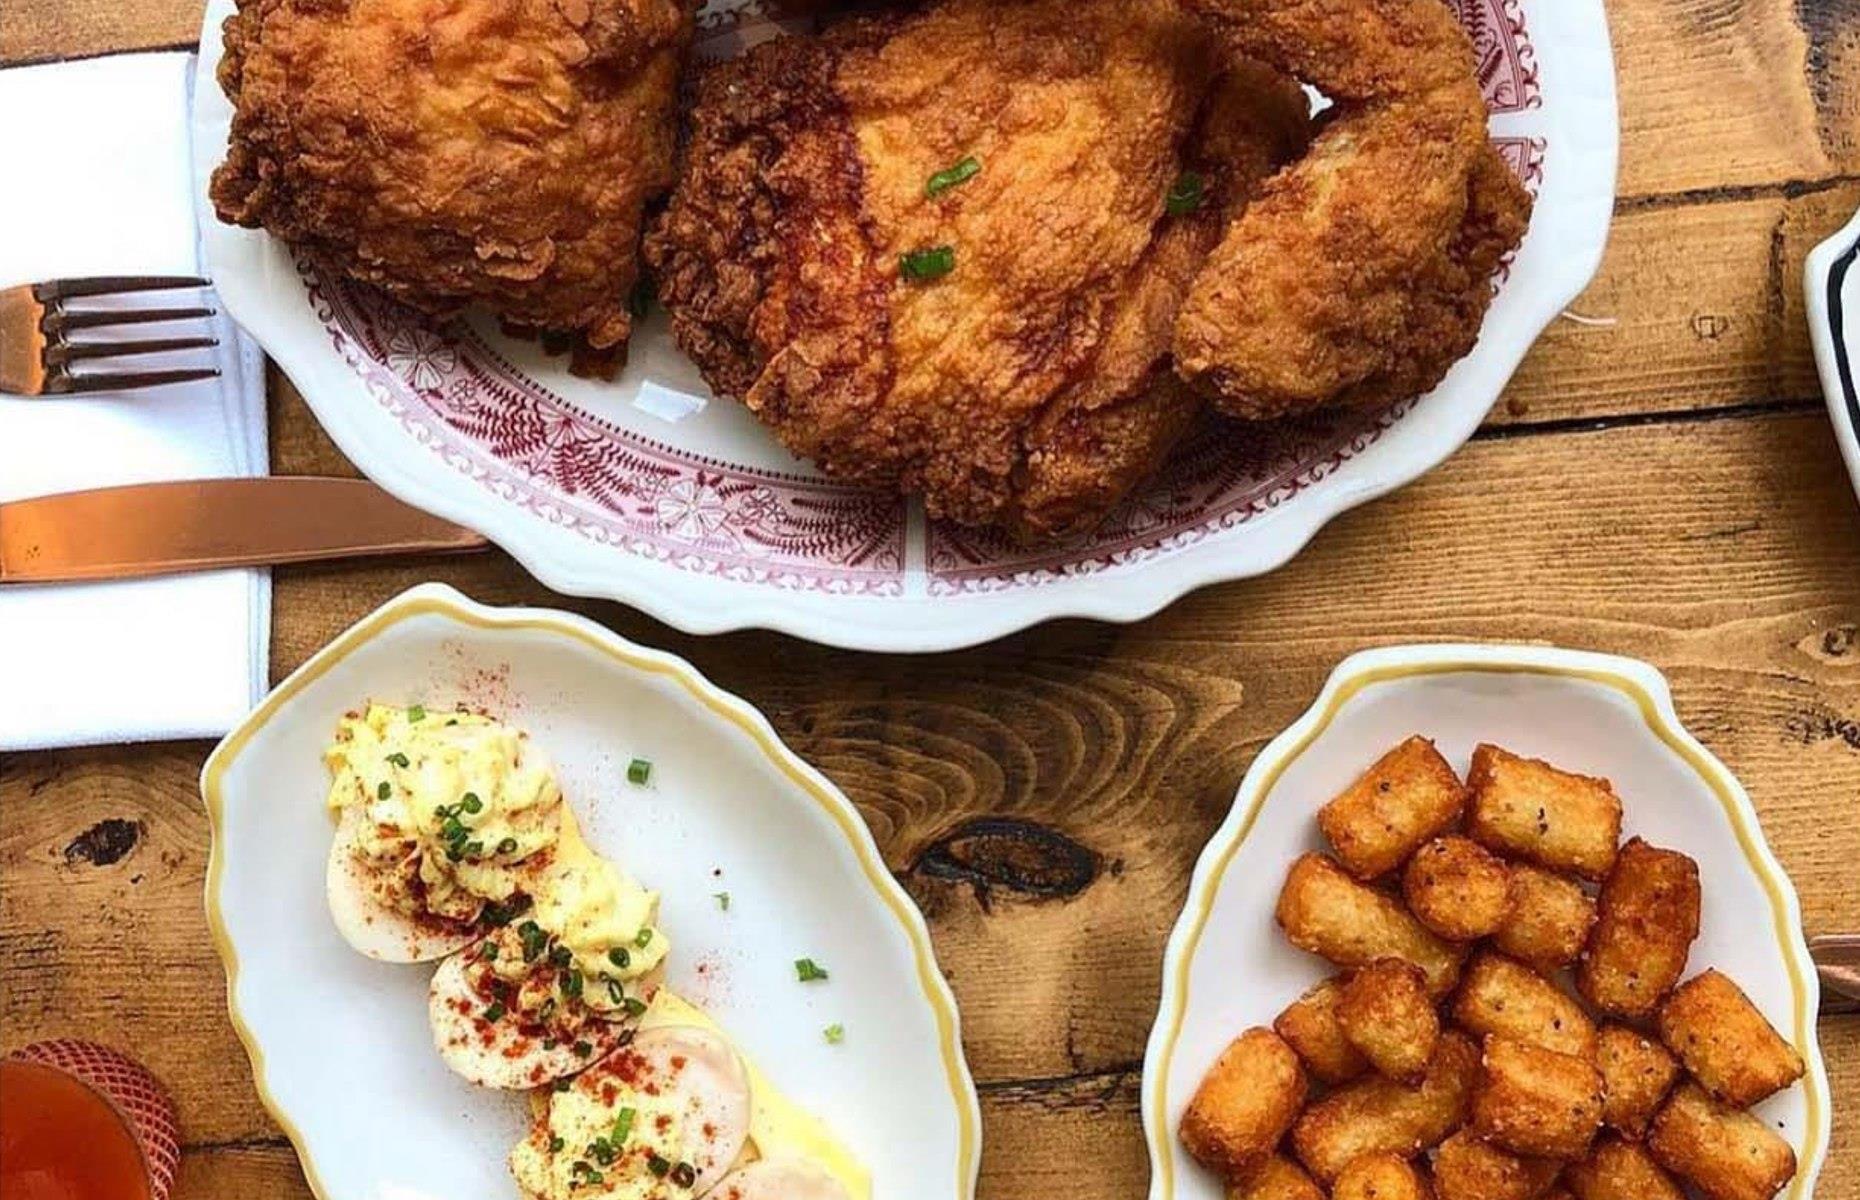 <p><a href="https://haberdish.com/">Haberdish</a> is a quirky brunch and dinner spot dedicated to Southern classics, and choosing a dish here isn't easy. The <a href="https://www.yelp.co.uk/biz/haberdish-charlotte">menu is filled with crowd-pleasers</a> like hush puppies, fried chicken, and tater tots. Apart from the juicy and perfectly crispy chicken, customers particularly love the sweet potato dumplings, served with brown butter, sage, and Parmesan, as well as the smoked deviled eggs with chives and paprika. If you're ordering from the weekend brunch menu, don't miss out on the chicken biscuit sandwich.</p>